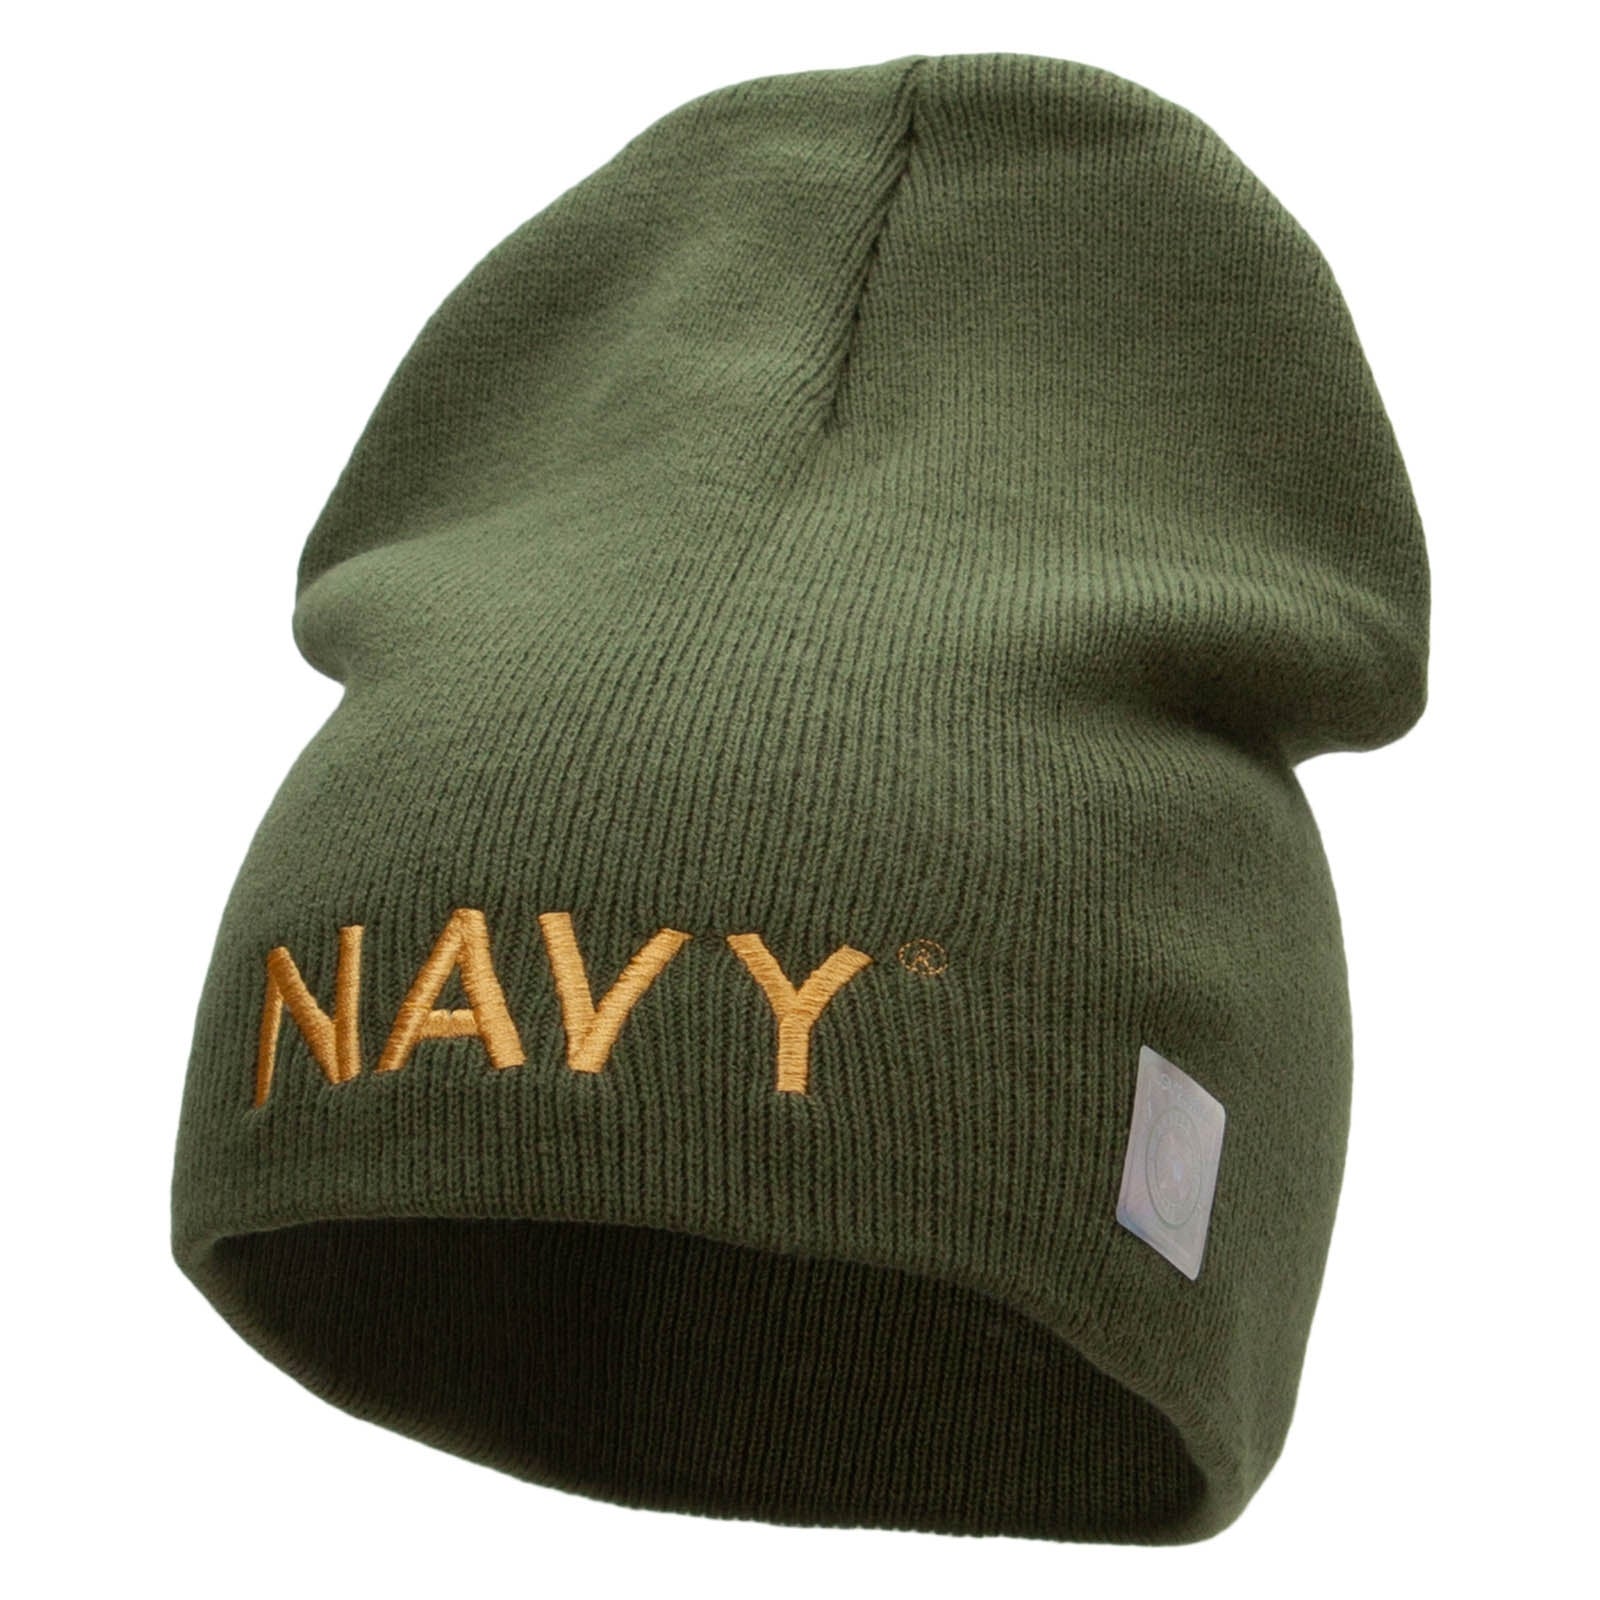 Licensed Navy Military Embroidered Short Beanie Made in USA - Olive OSFM